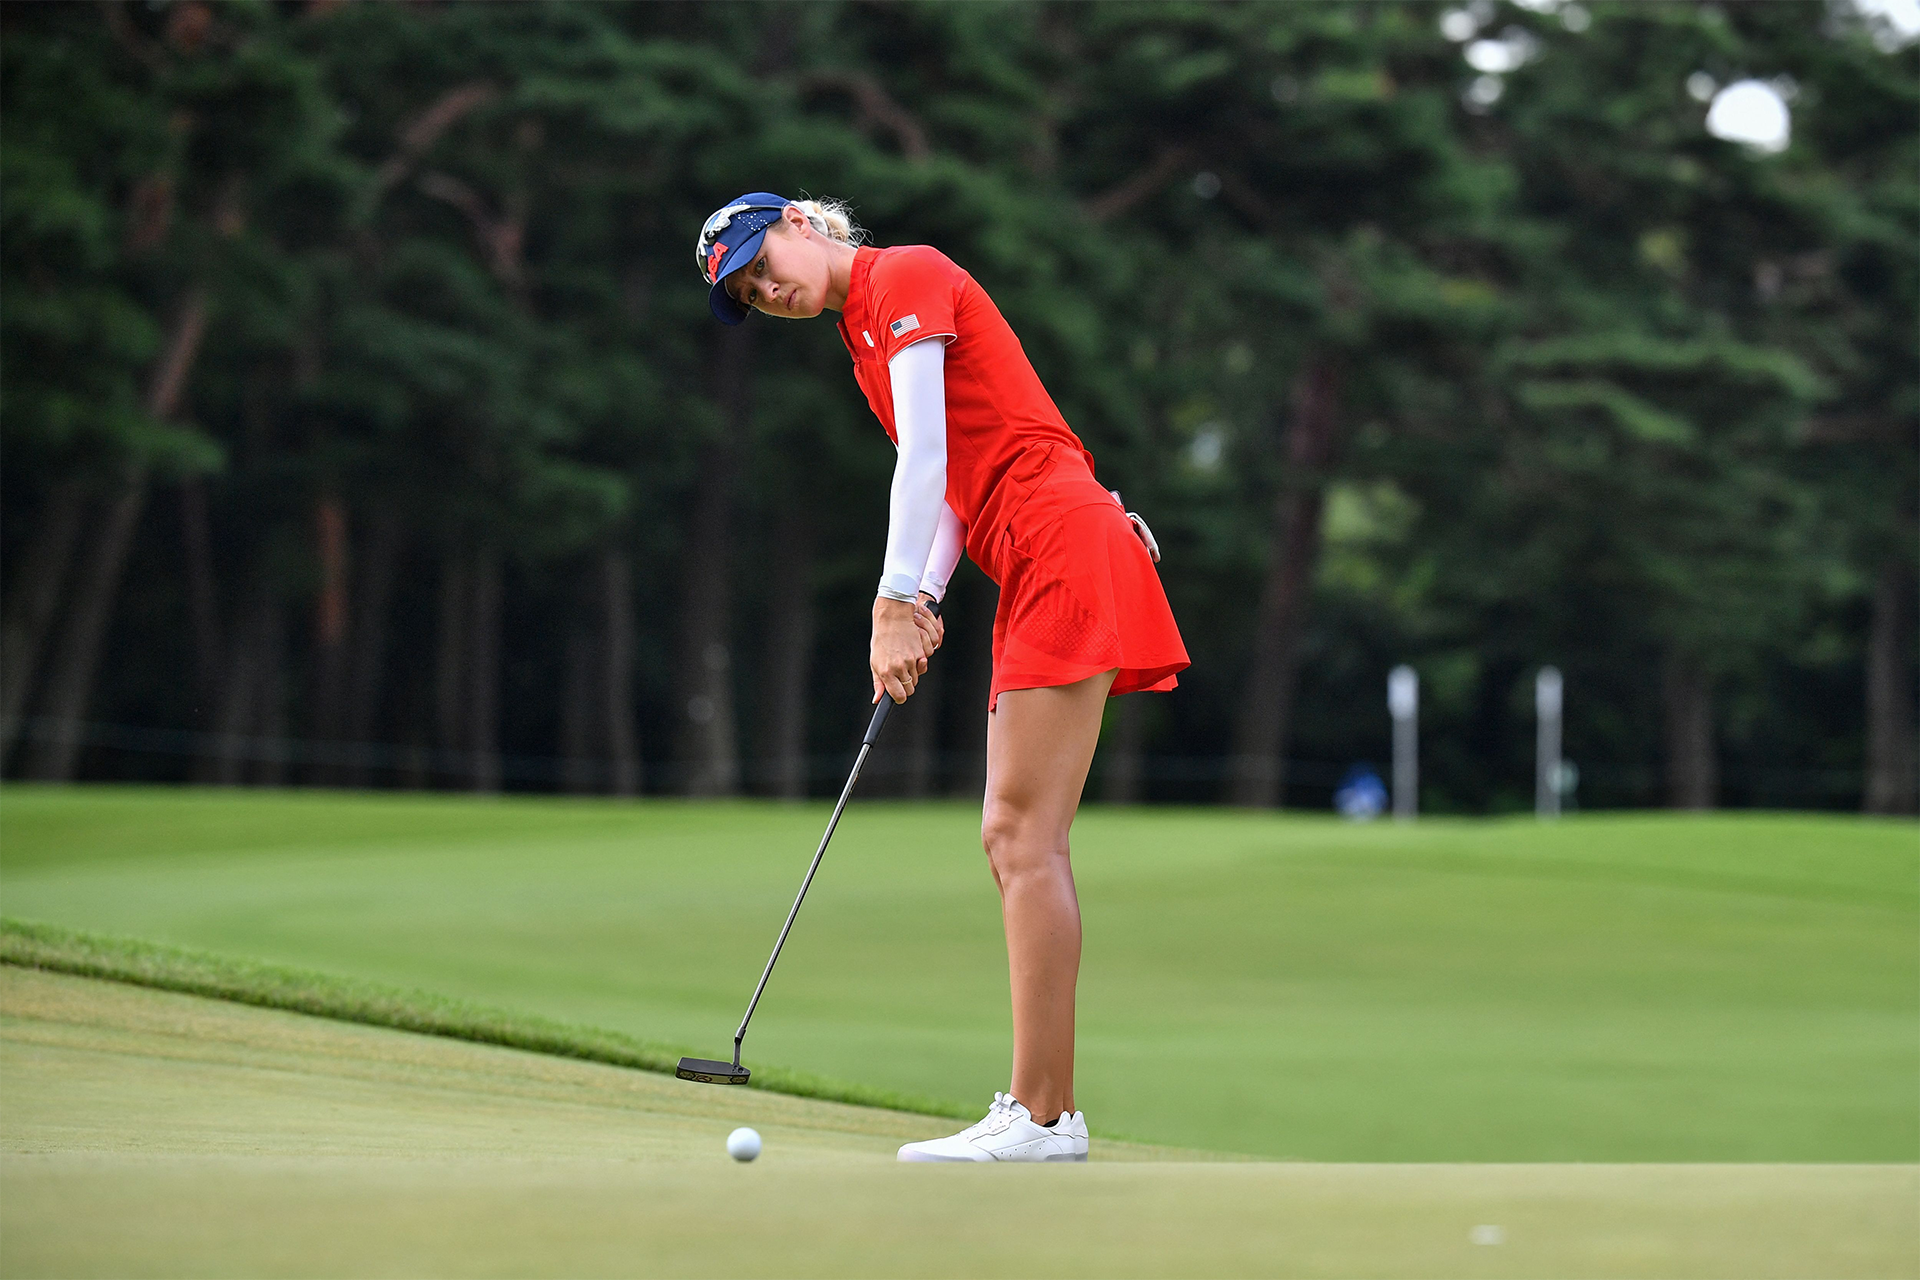 Golfer Nelly Korda lines up a putt. Korda will be going for her sixth consecutive LPGA Tour Win at the Cognizant Founders Cup this weekend on Peacock.